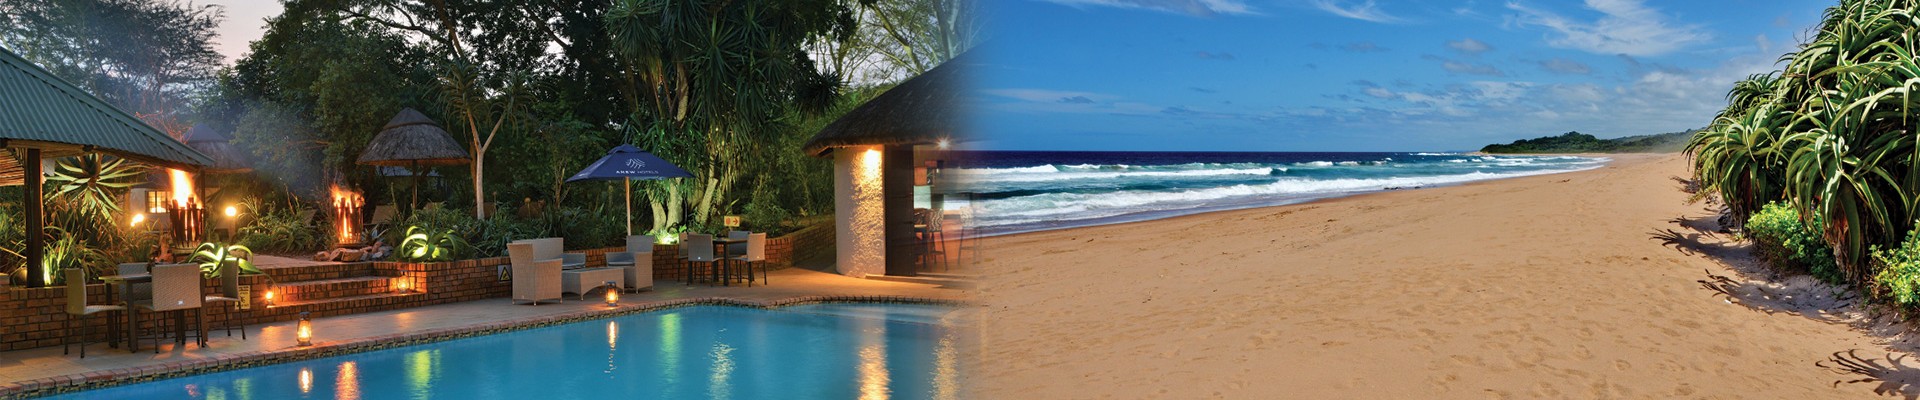 4* Anew Hotel Ocean Reef and 3* Anew Hotel Hluhluwe - Beach and Bush Experience (5 nights)